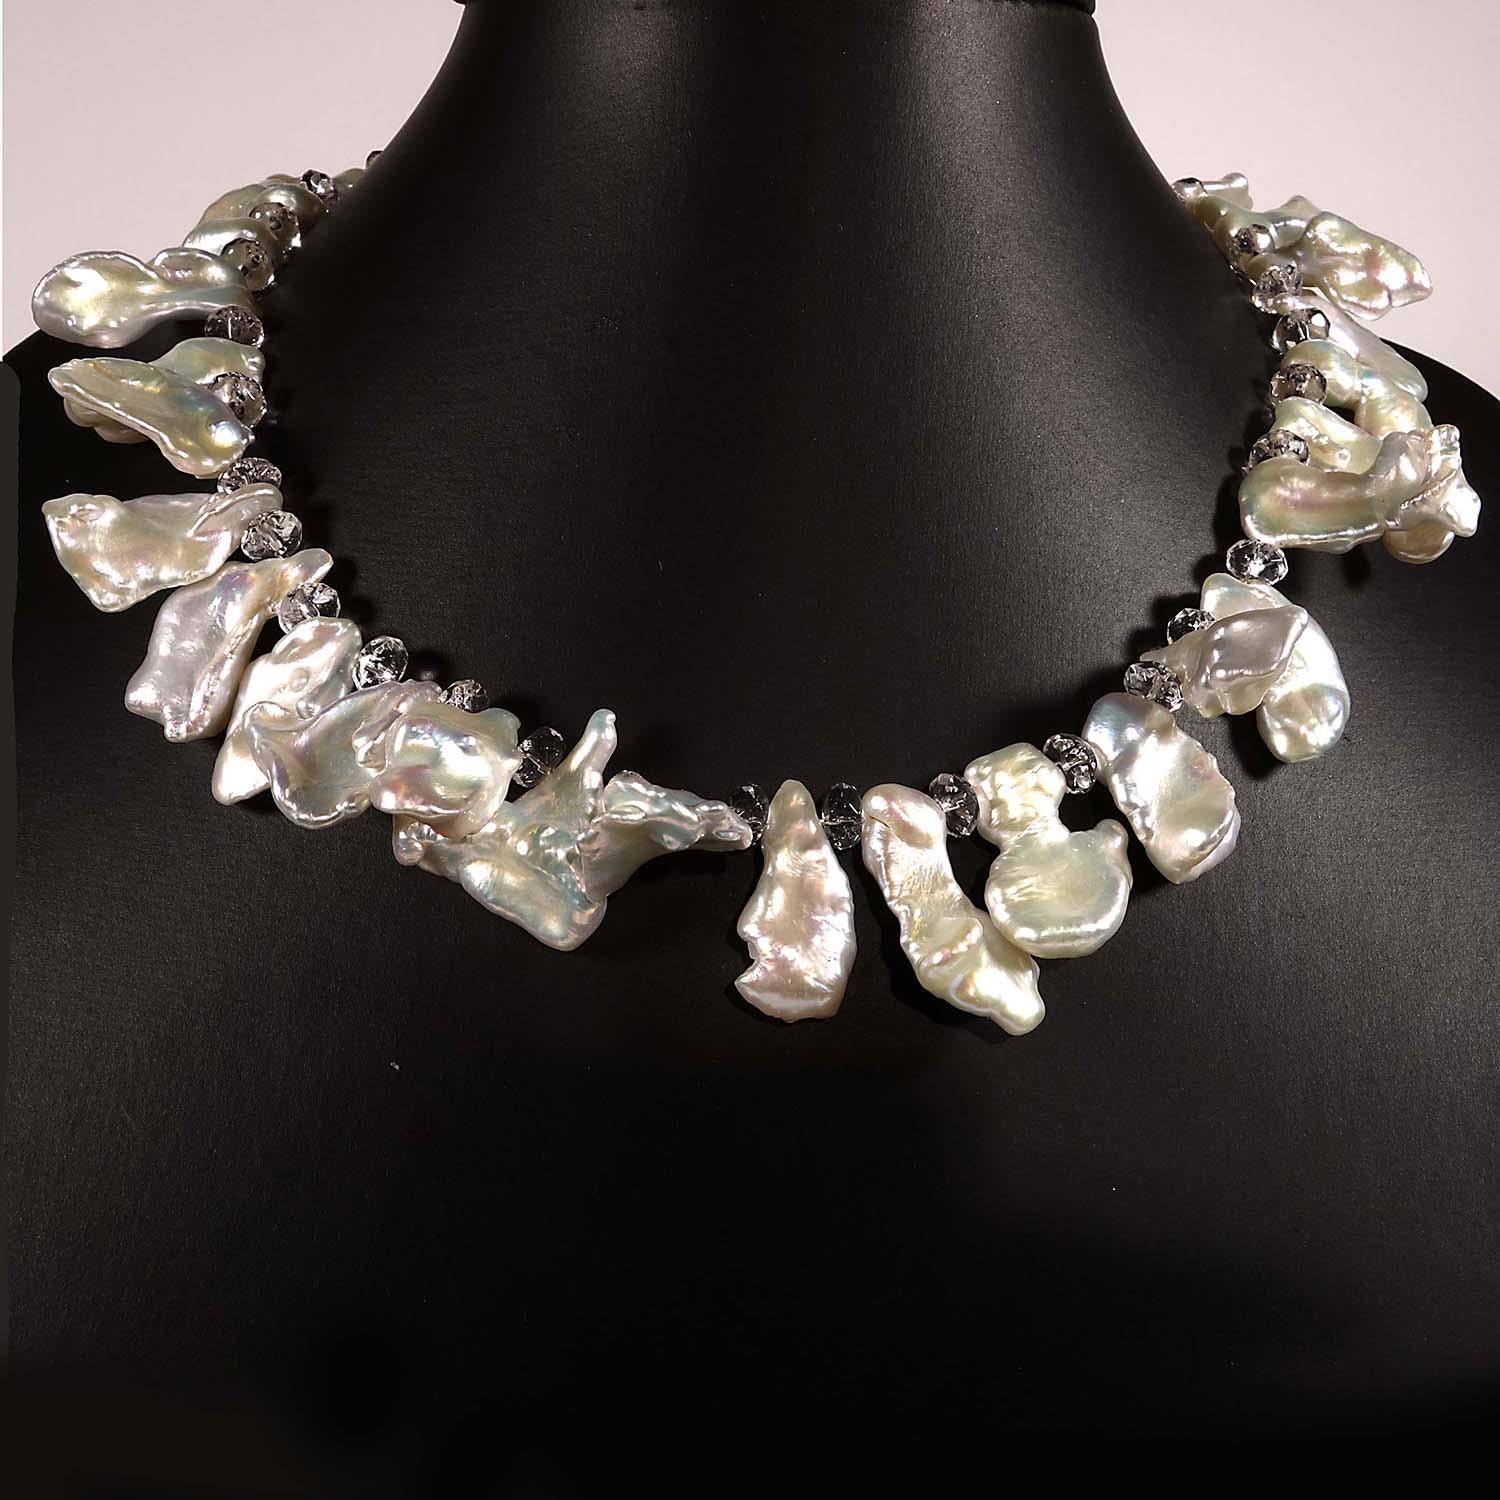 Necklace of White Iridescent freeform Pearls and faceted clear Quartz crystal rondels.  The Pearls are gently graduated from 17x9mm to 23x12mm.  This 14.5 inch choker necklace is secured with a Sterling Silver clasp.  See more from this seller by